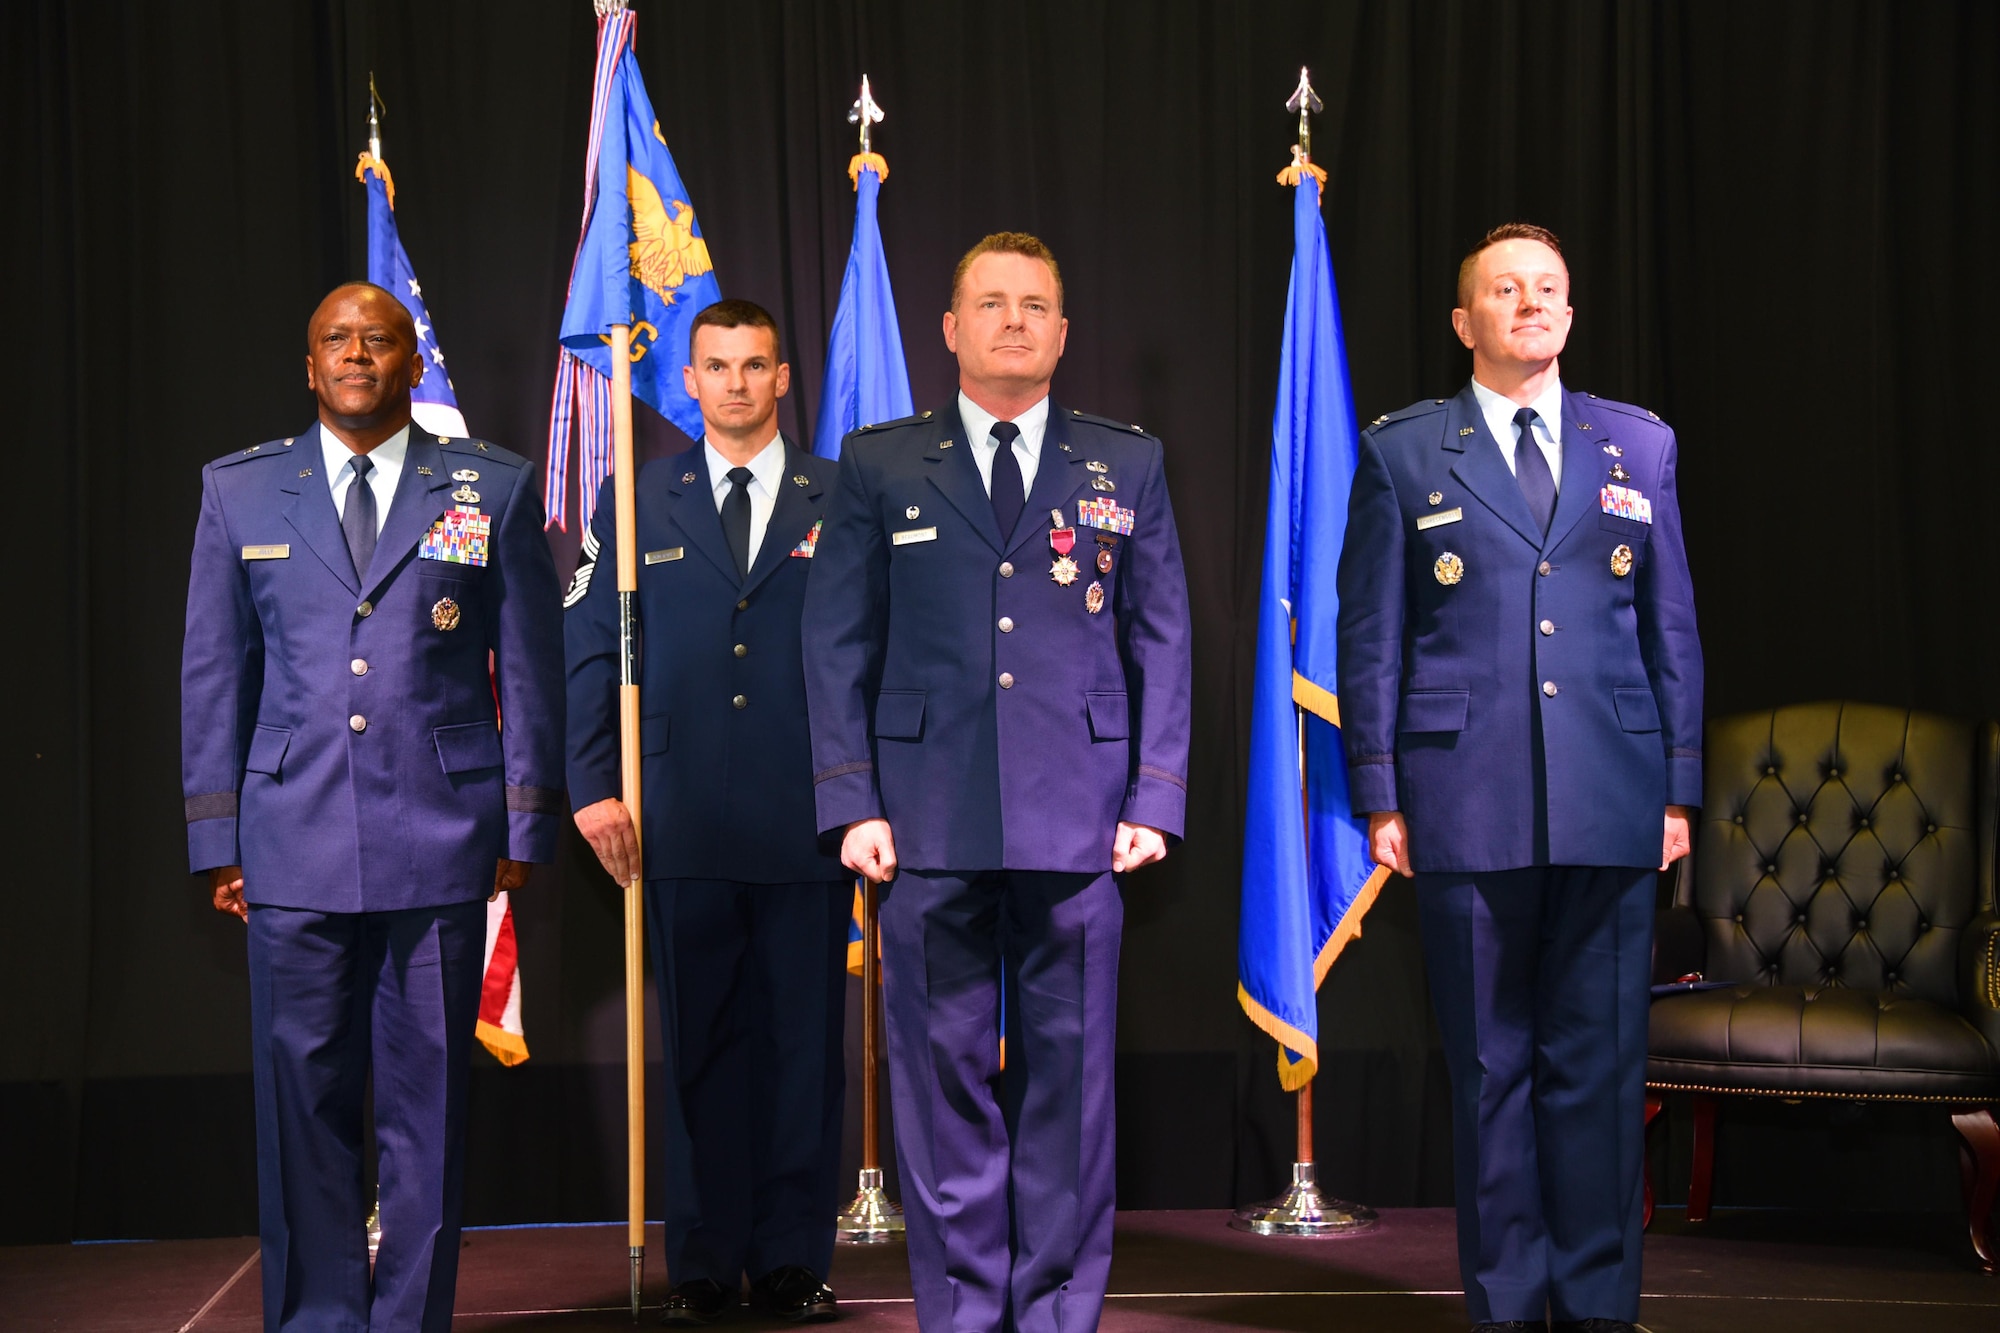 Col. Chad Schrecengost assumes command of the 82nd Mission Support Group, July 13, 2017. (U.S. Air Force photo by Liz Colunga)